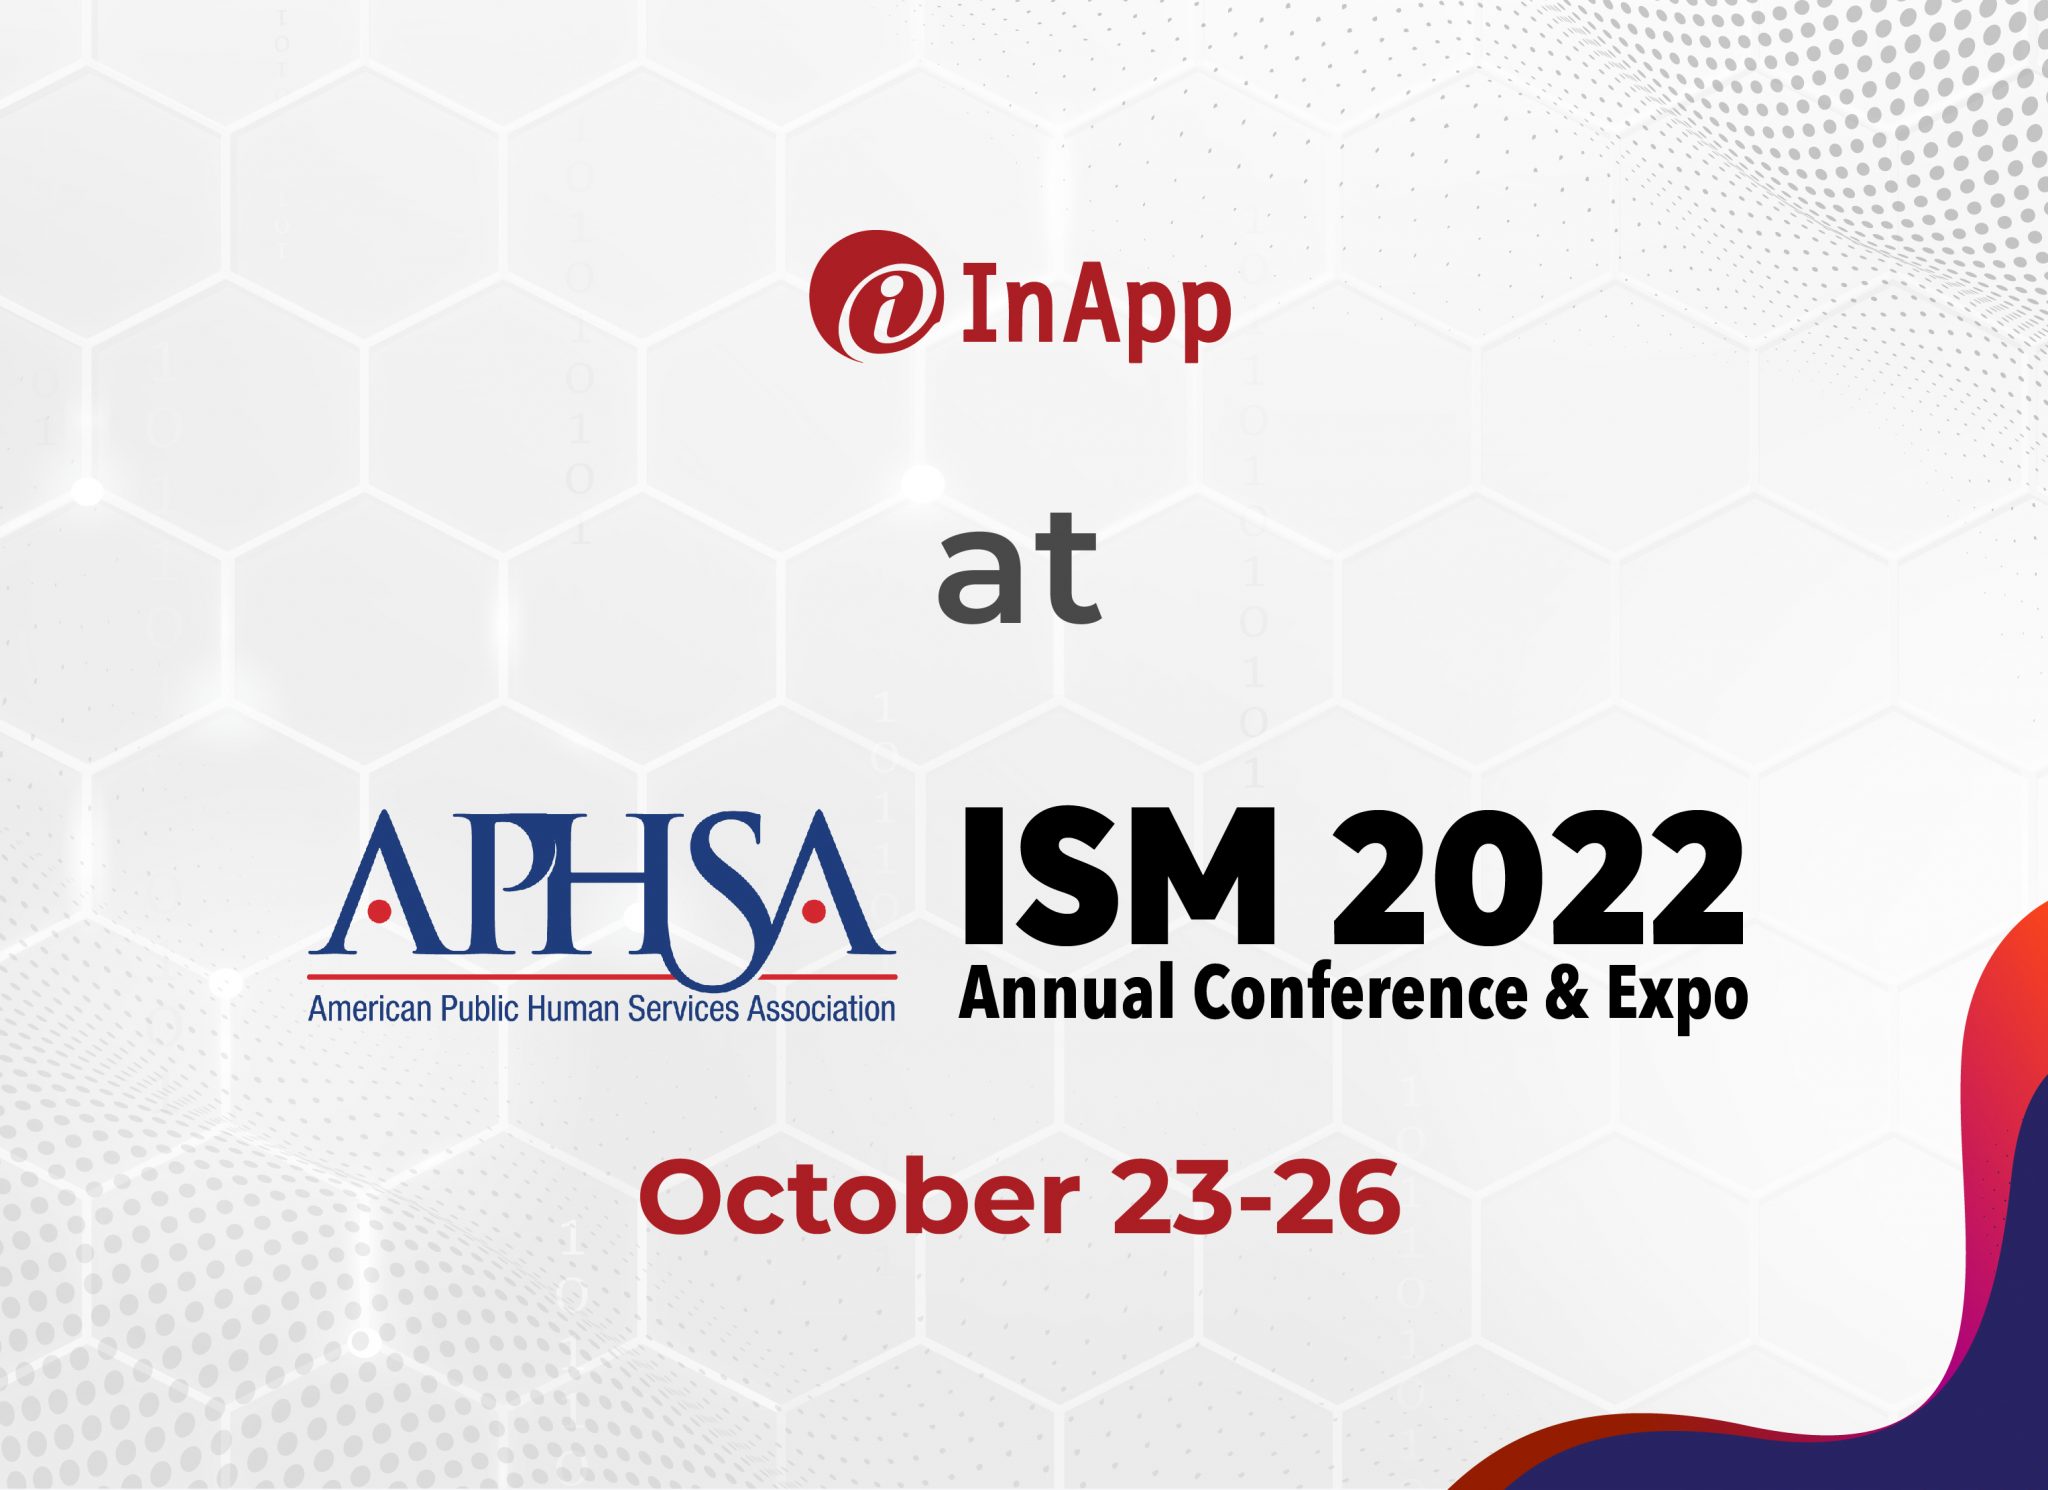 InApp To Attend the APHSA ISM Conference 2022 InApp